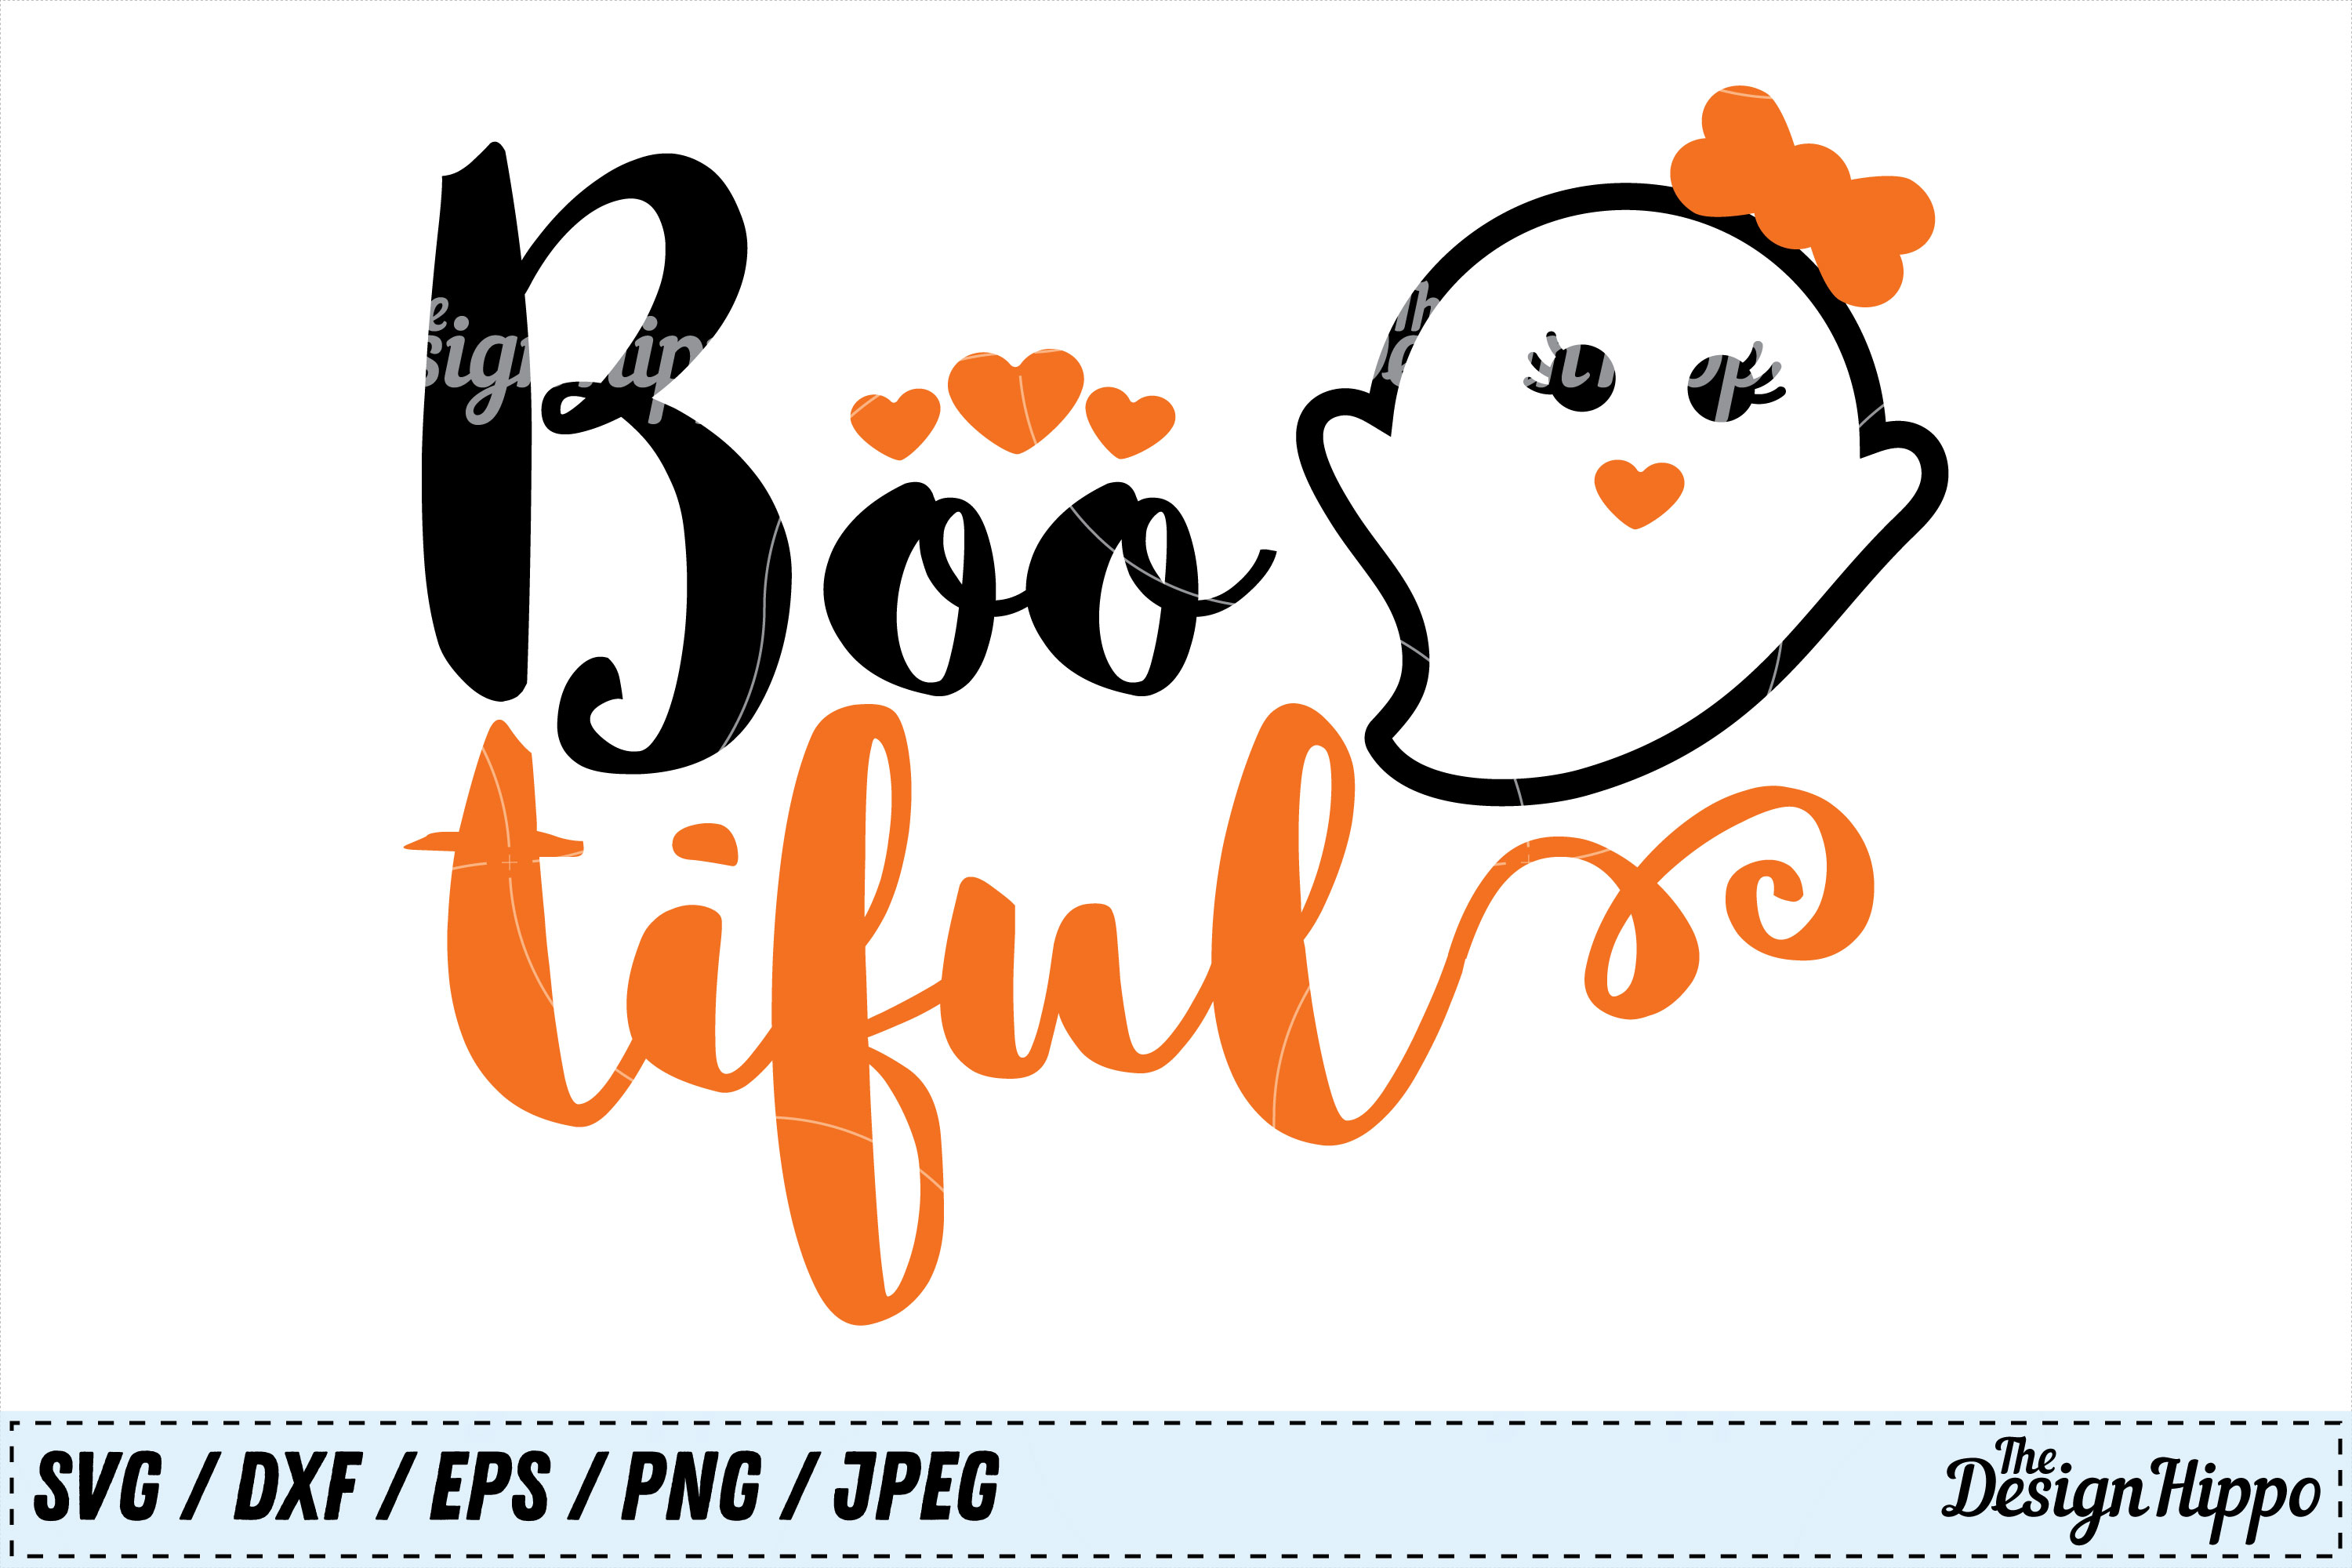 Download Free SVG Cut File - 2020 is Boo Sheet Halloween svg, Ghost in Mask...